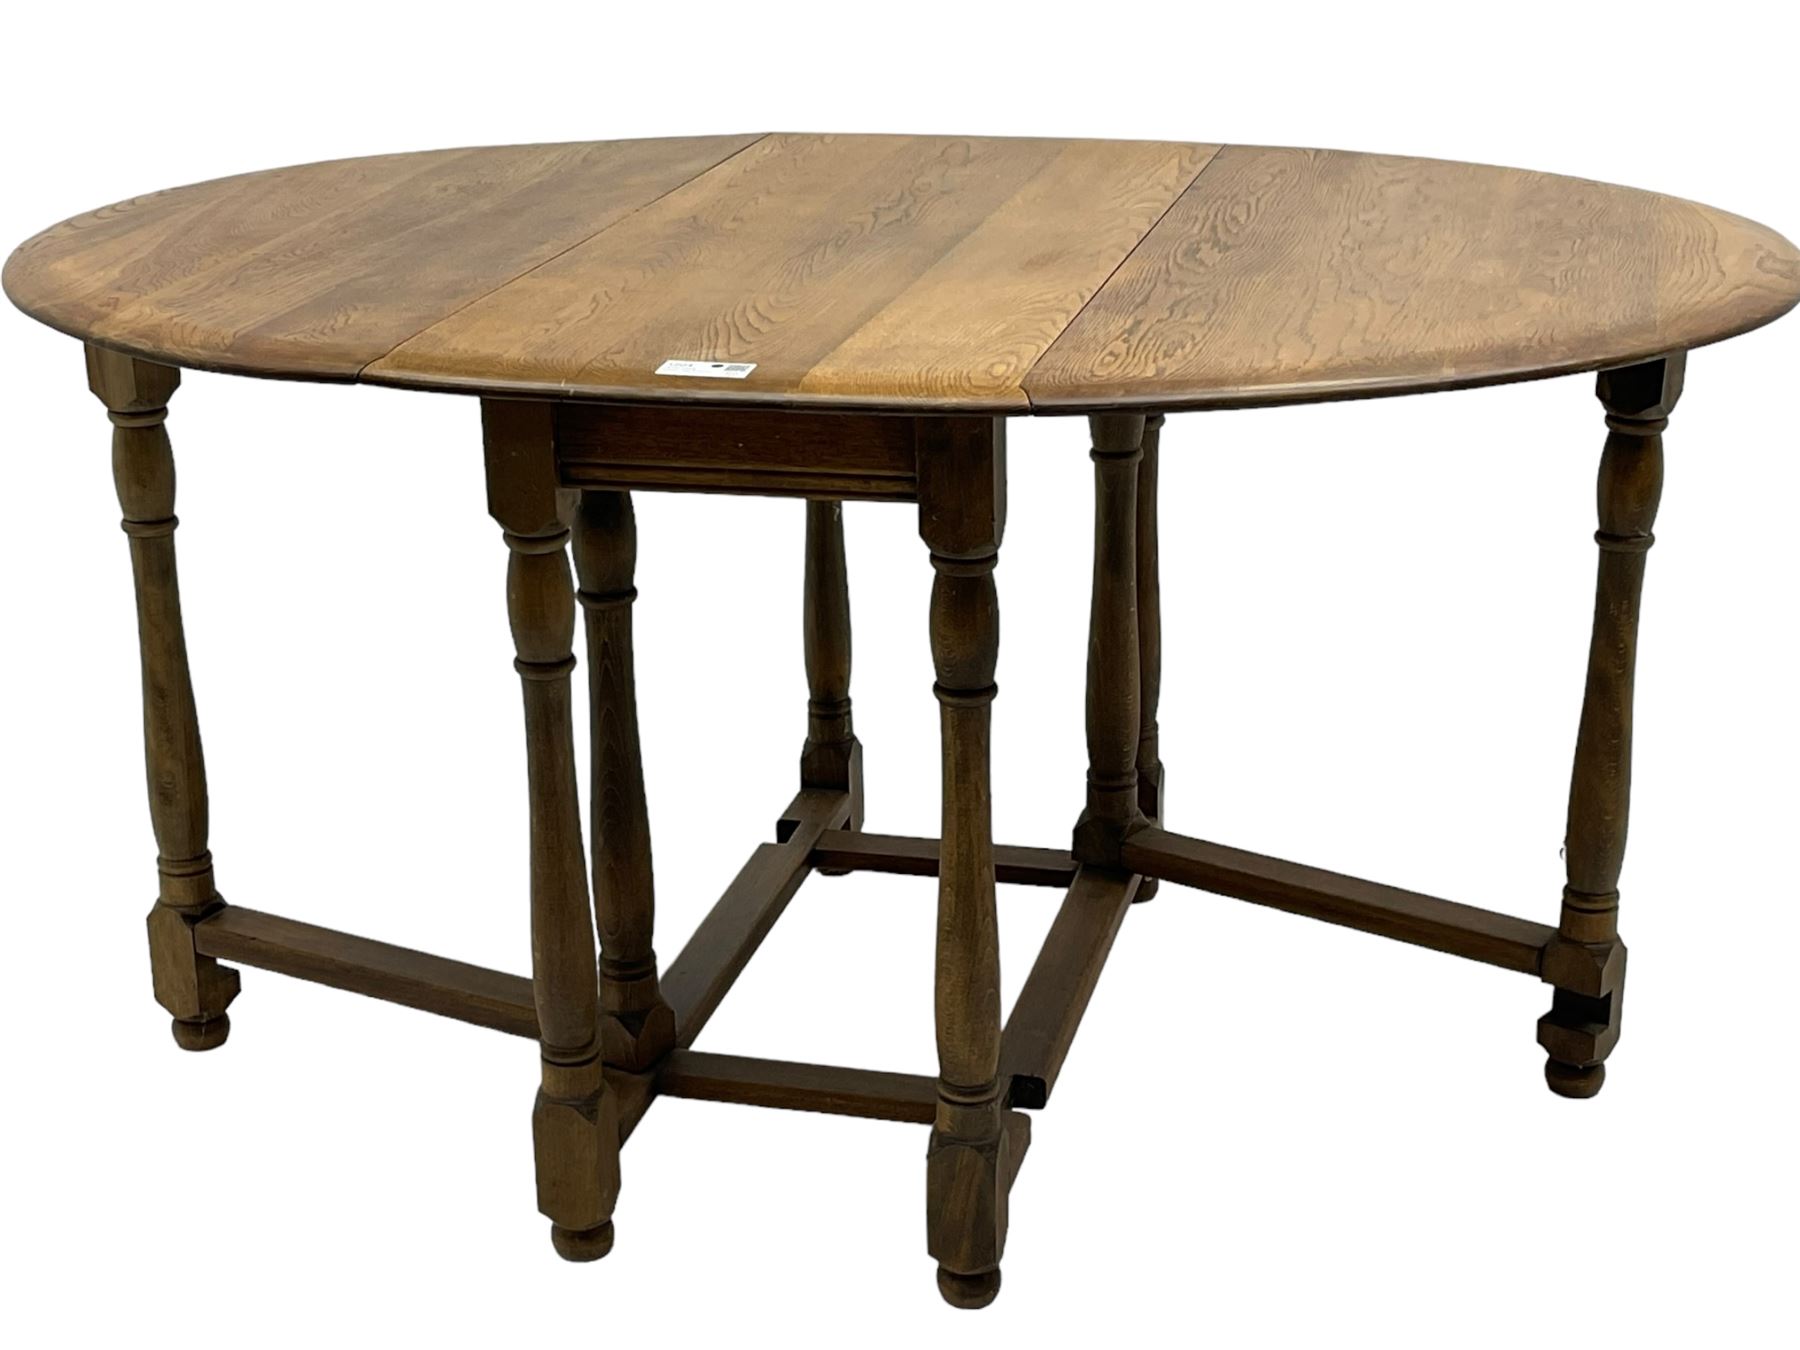 Mid-to-late 20th century oak and beech drop-leaf dining table - Image 2 of 9